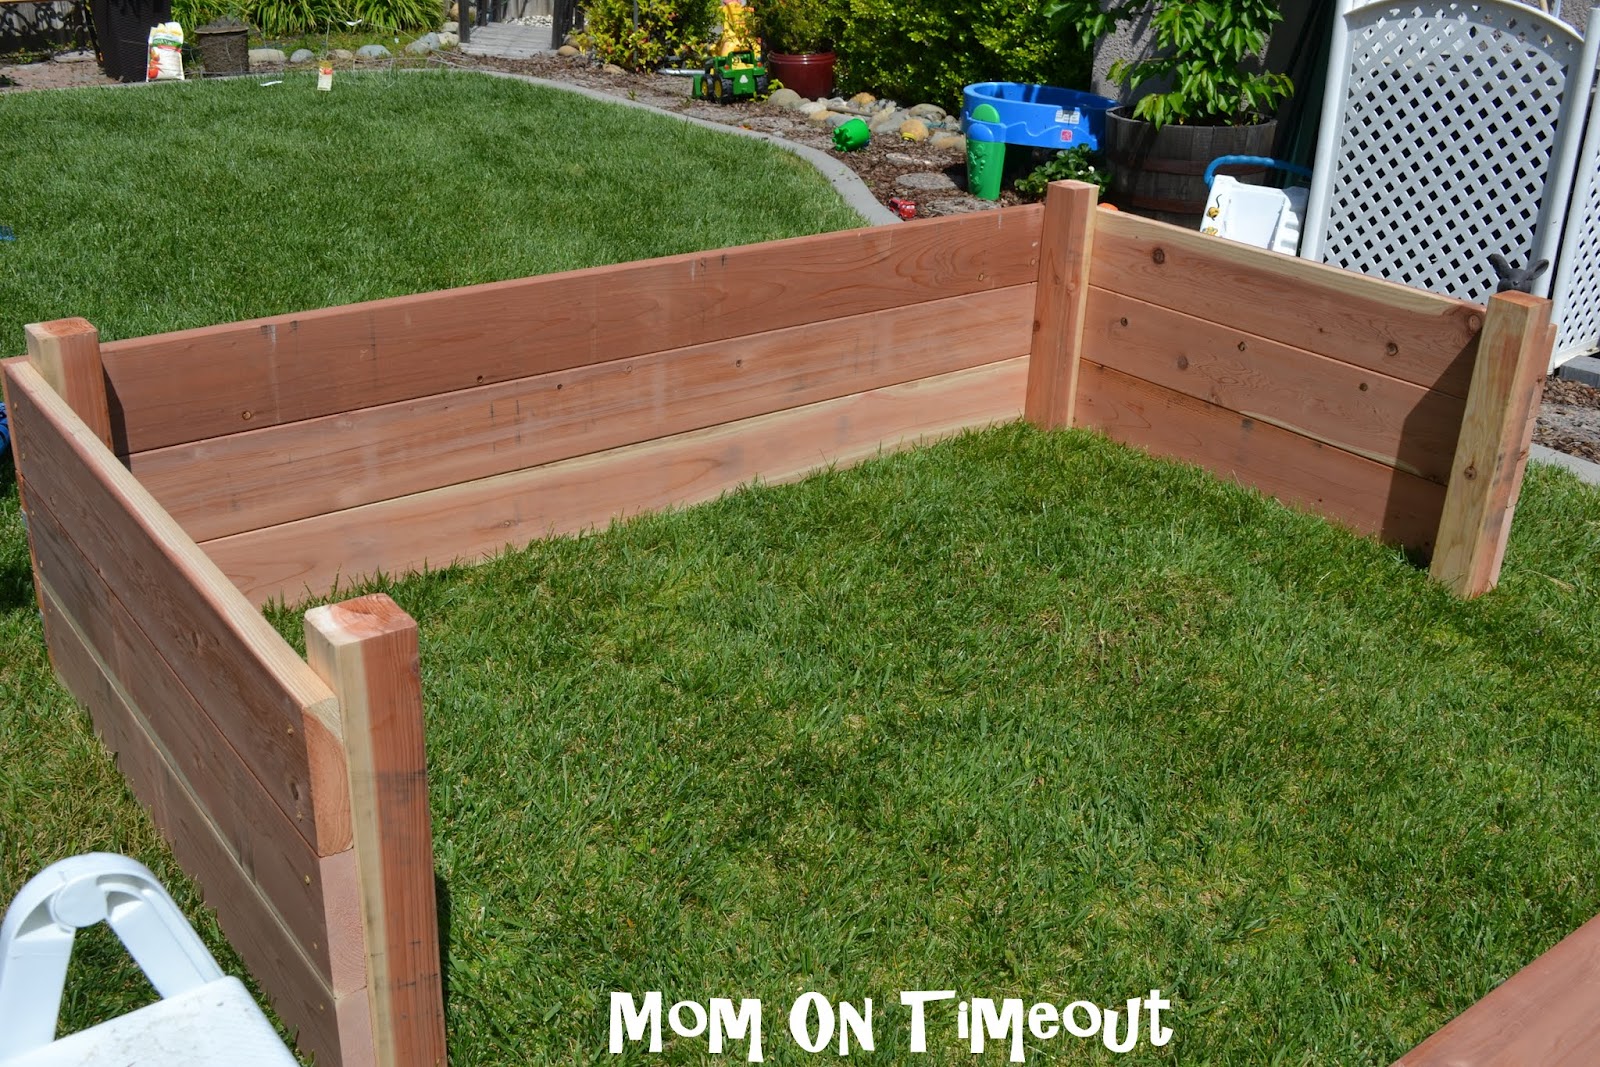 Woodworking diy planter box instructions PDF Free Download